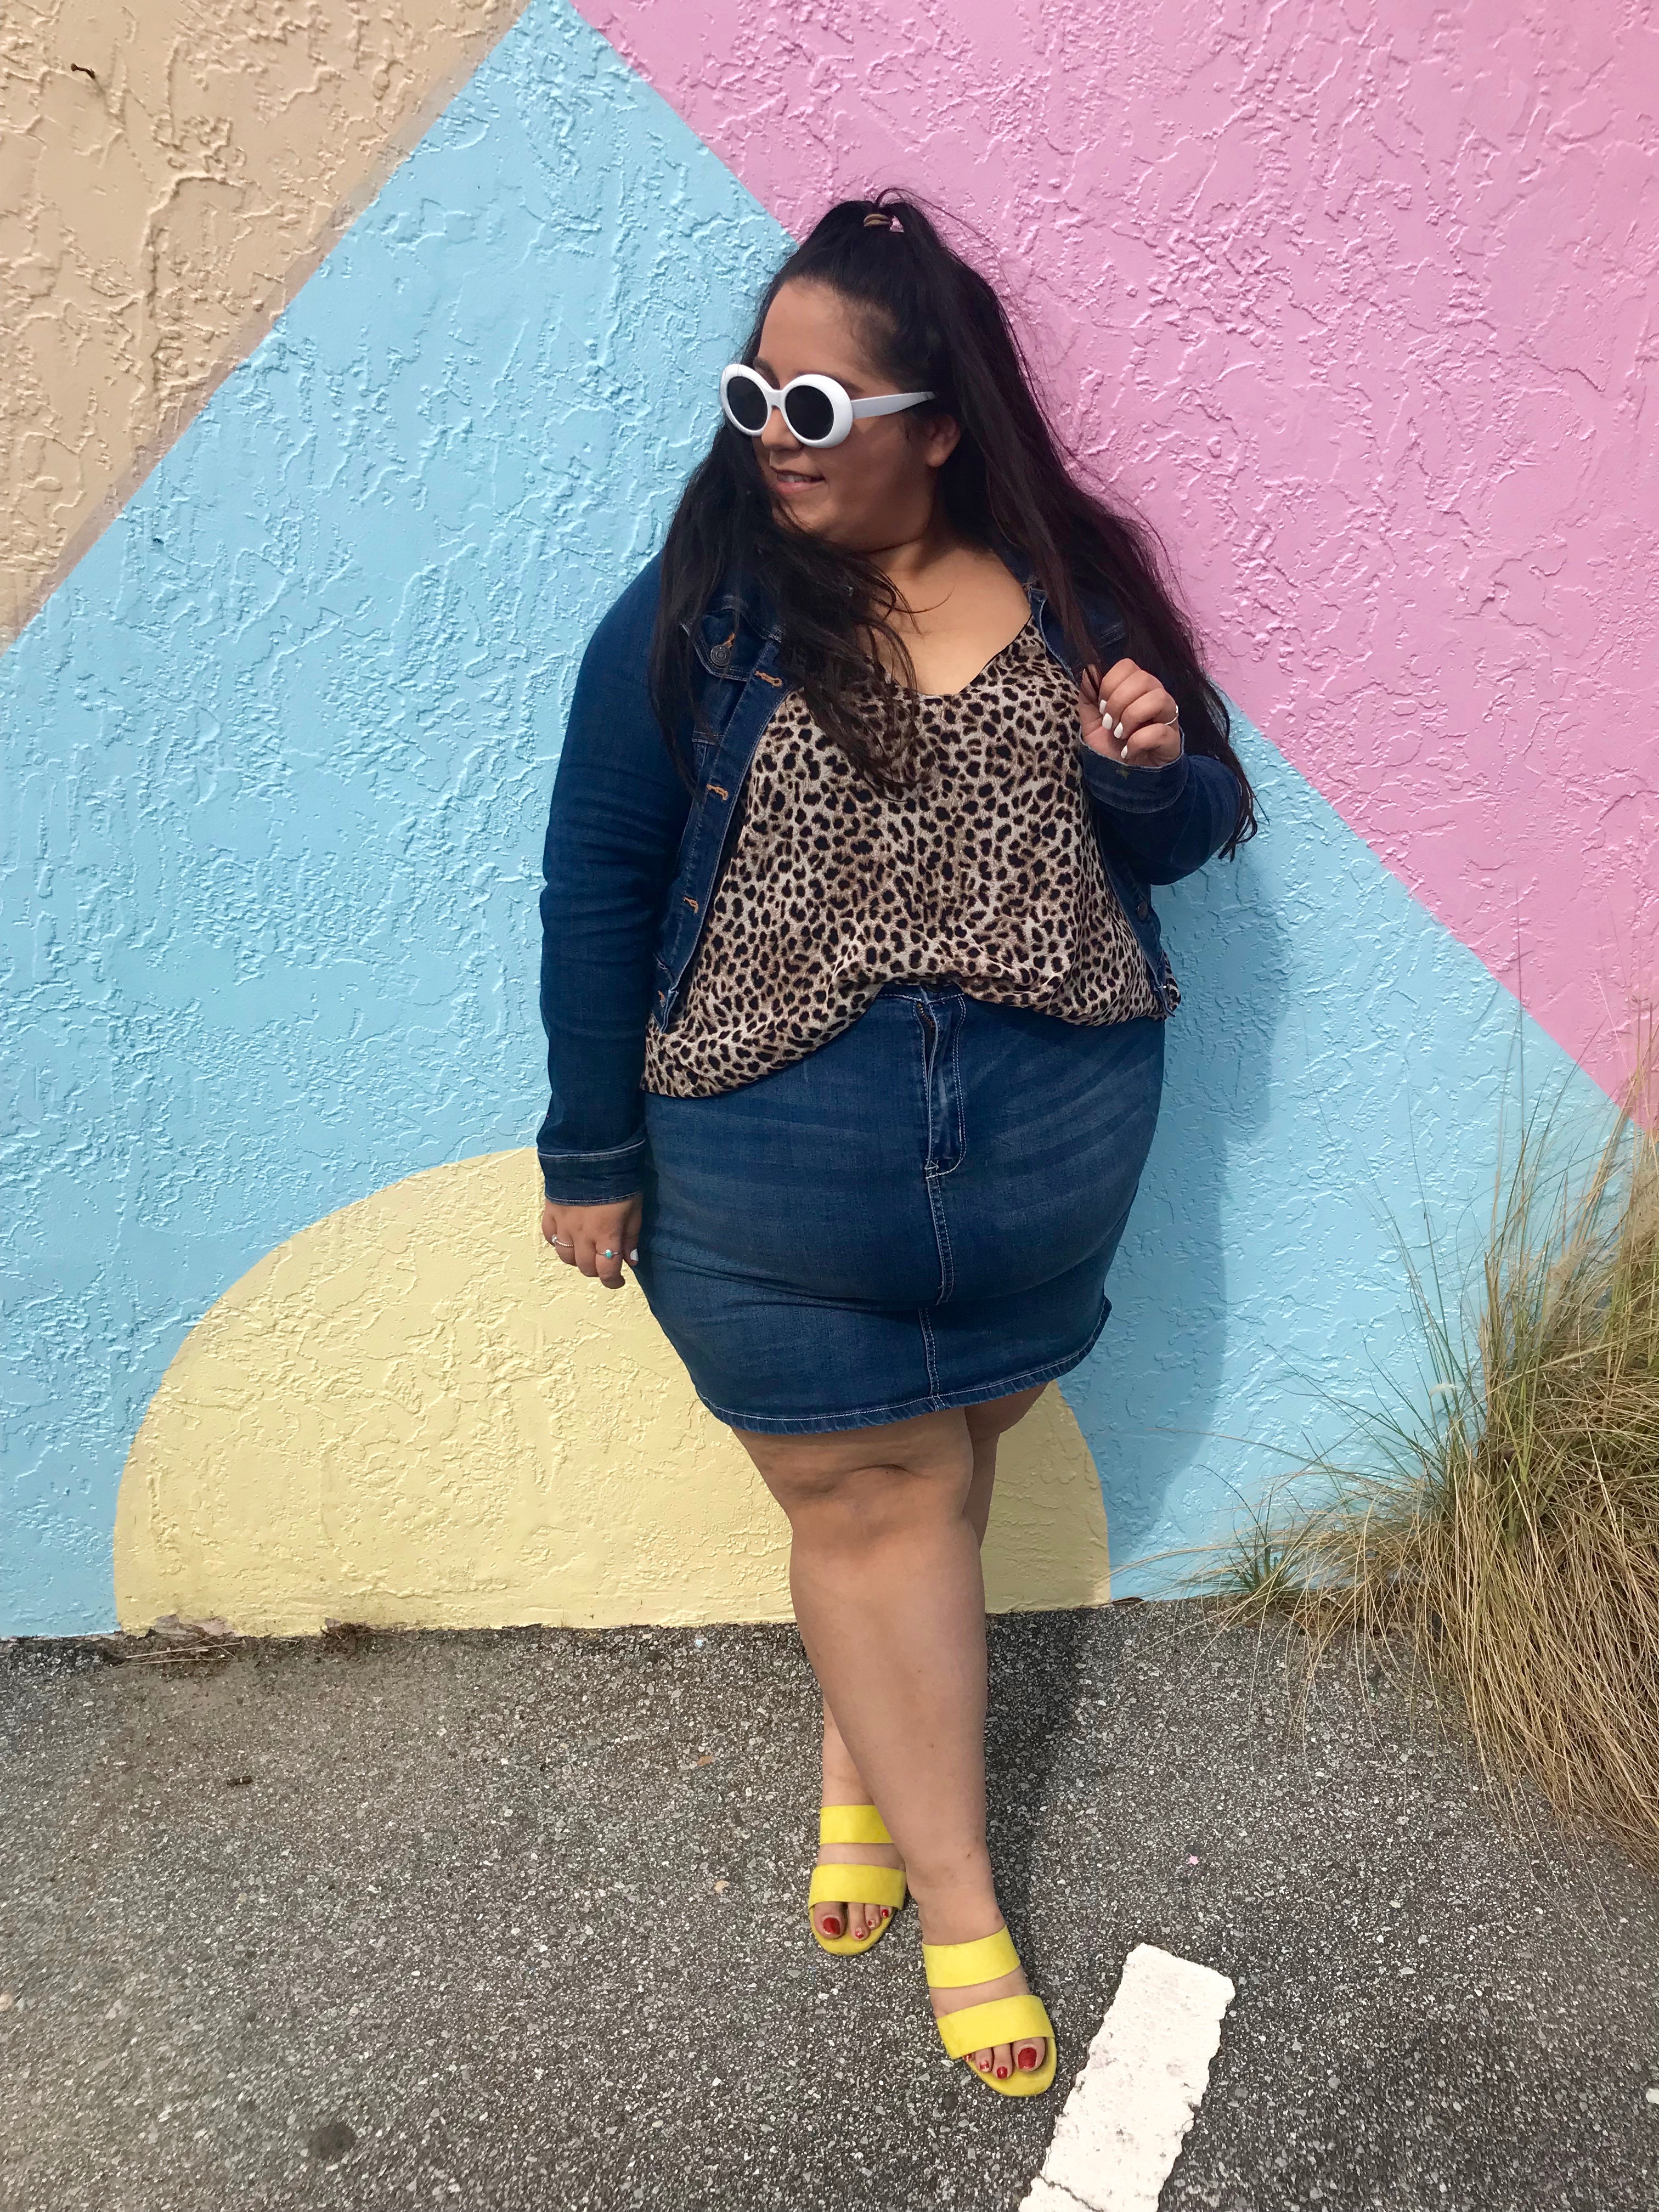 It’s Cheetahlicious! – 2000’s Inspired OOTD